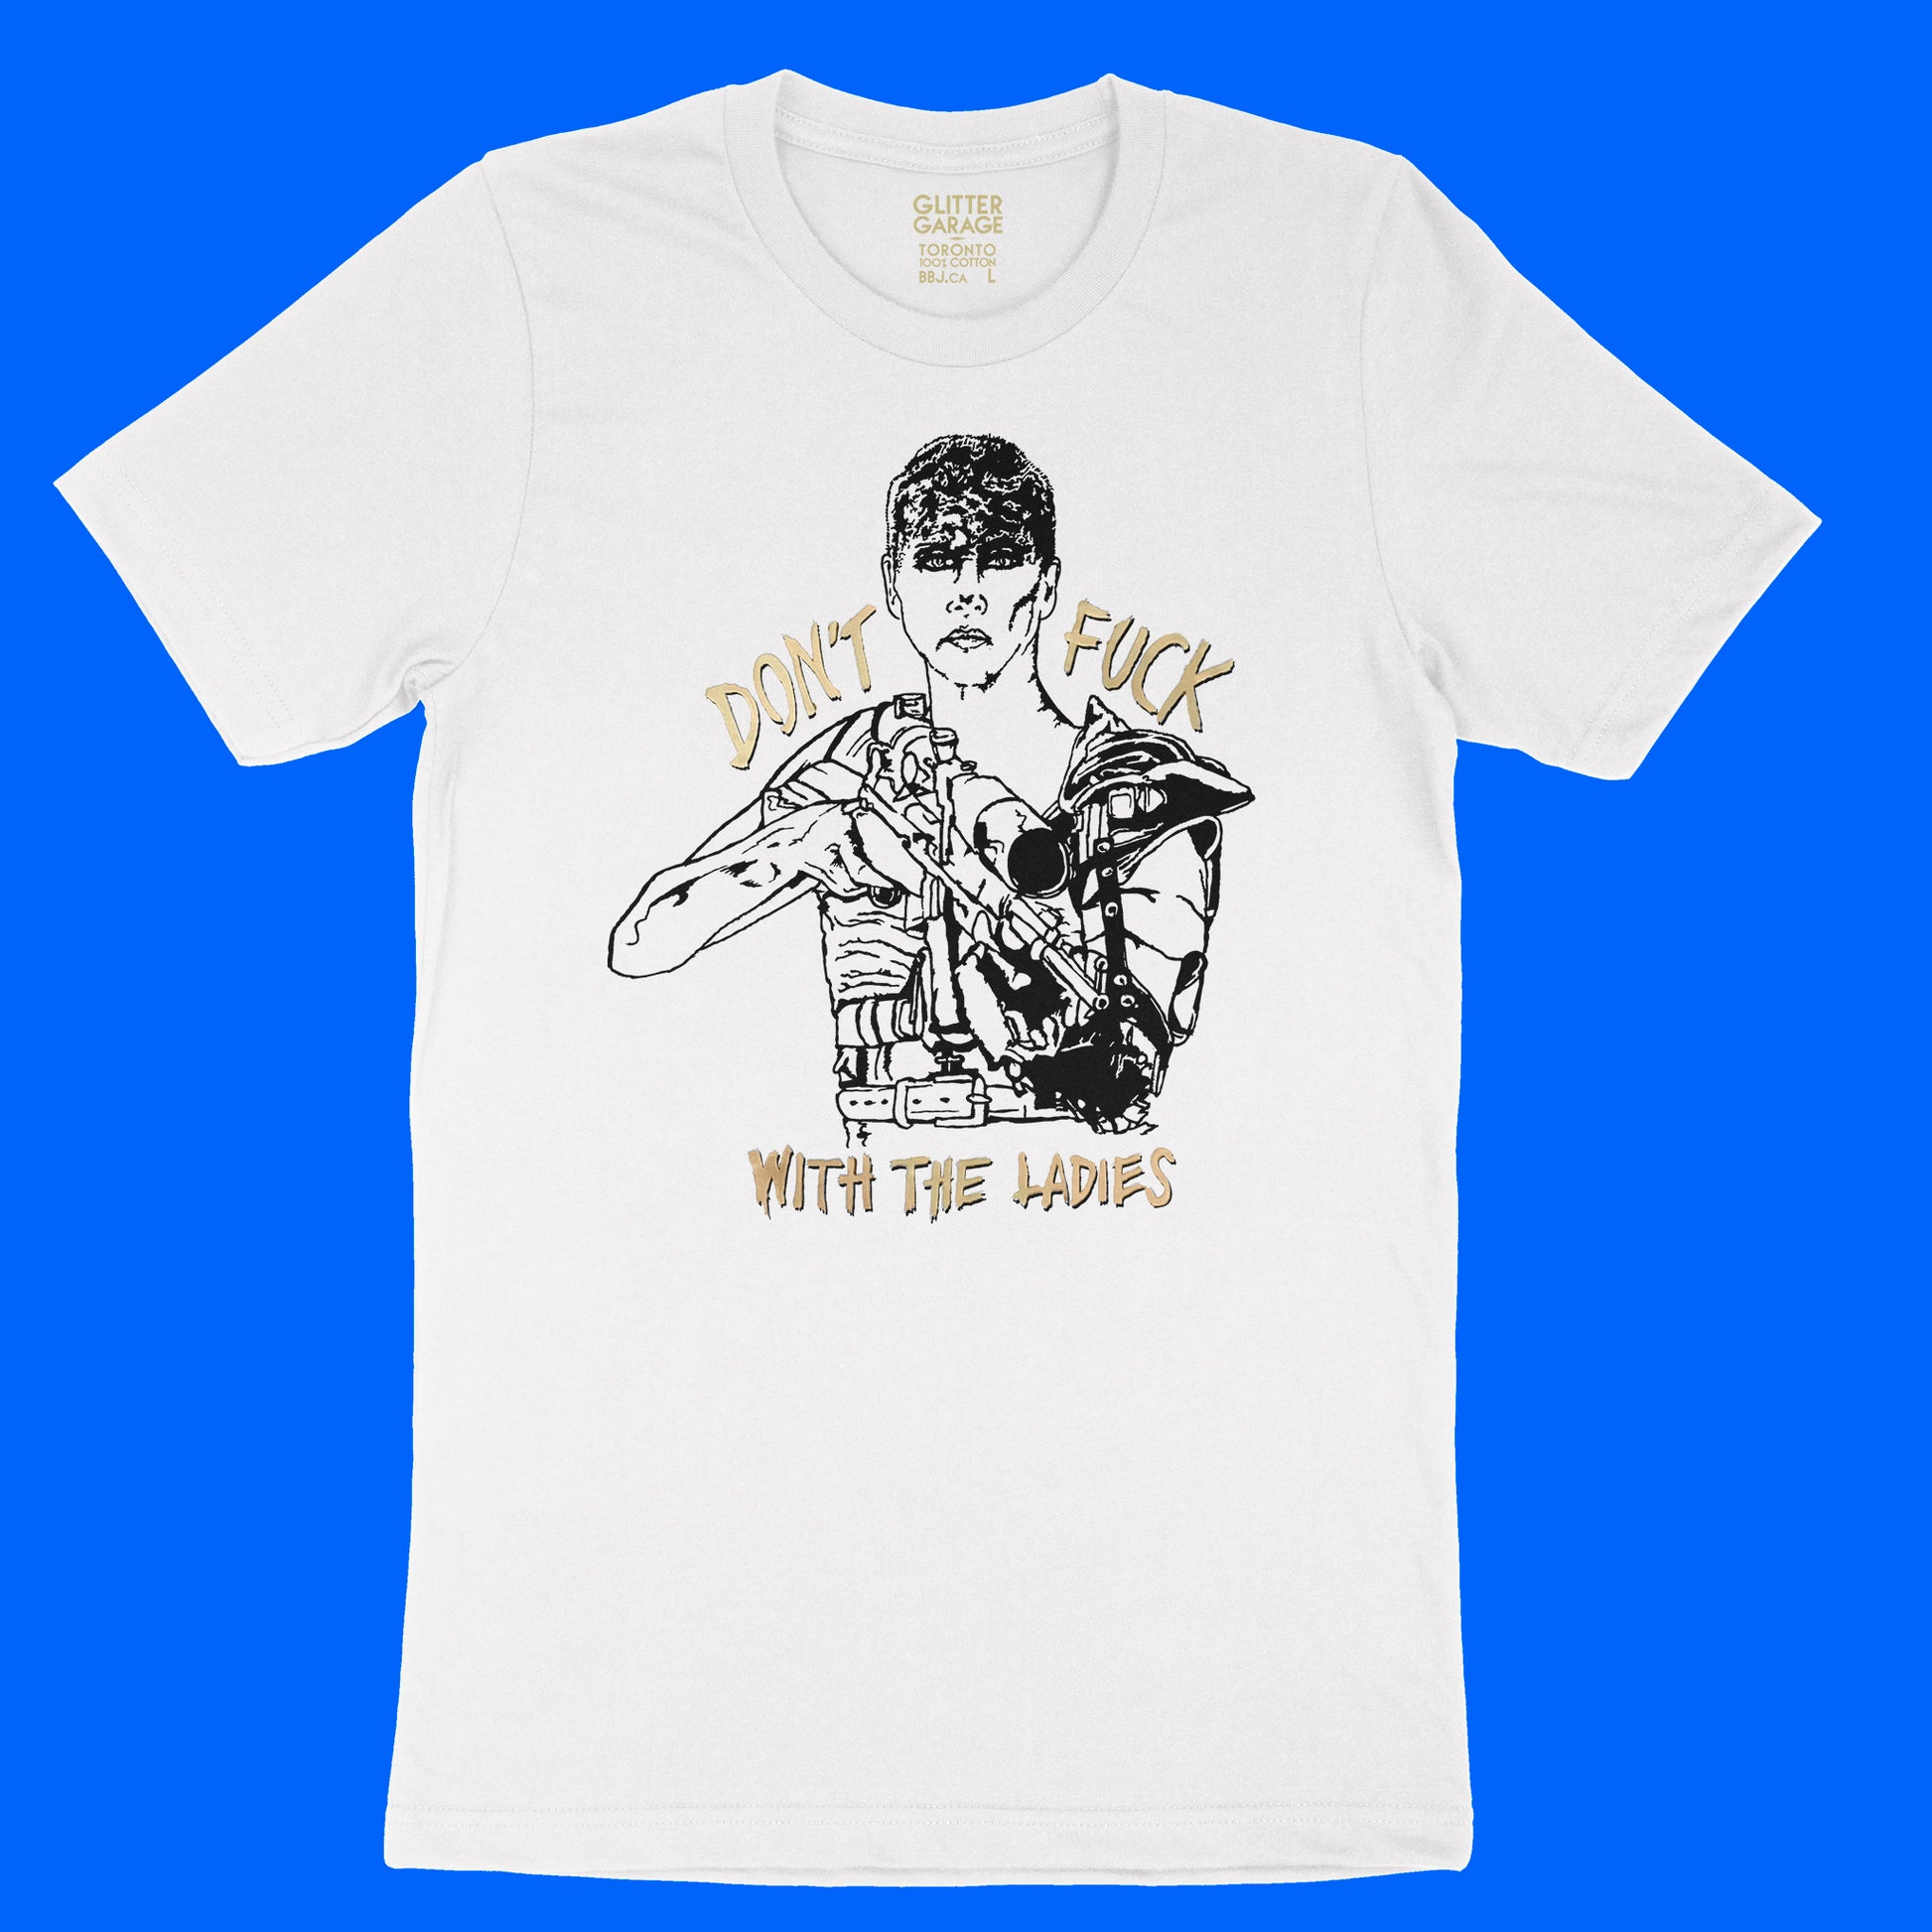 White unisex cotton t-shirt with Furiosa illustration in black, "Don't Fuck With The Ladies" text with metallic gold overlay by BBJ / Glitter Garage